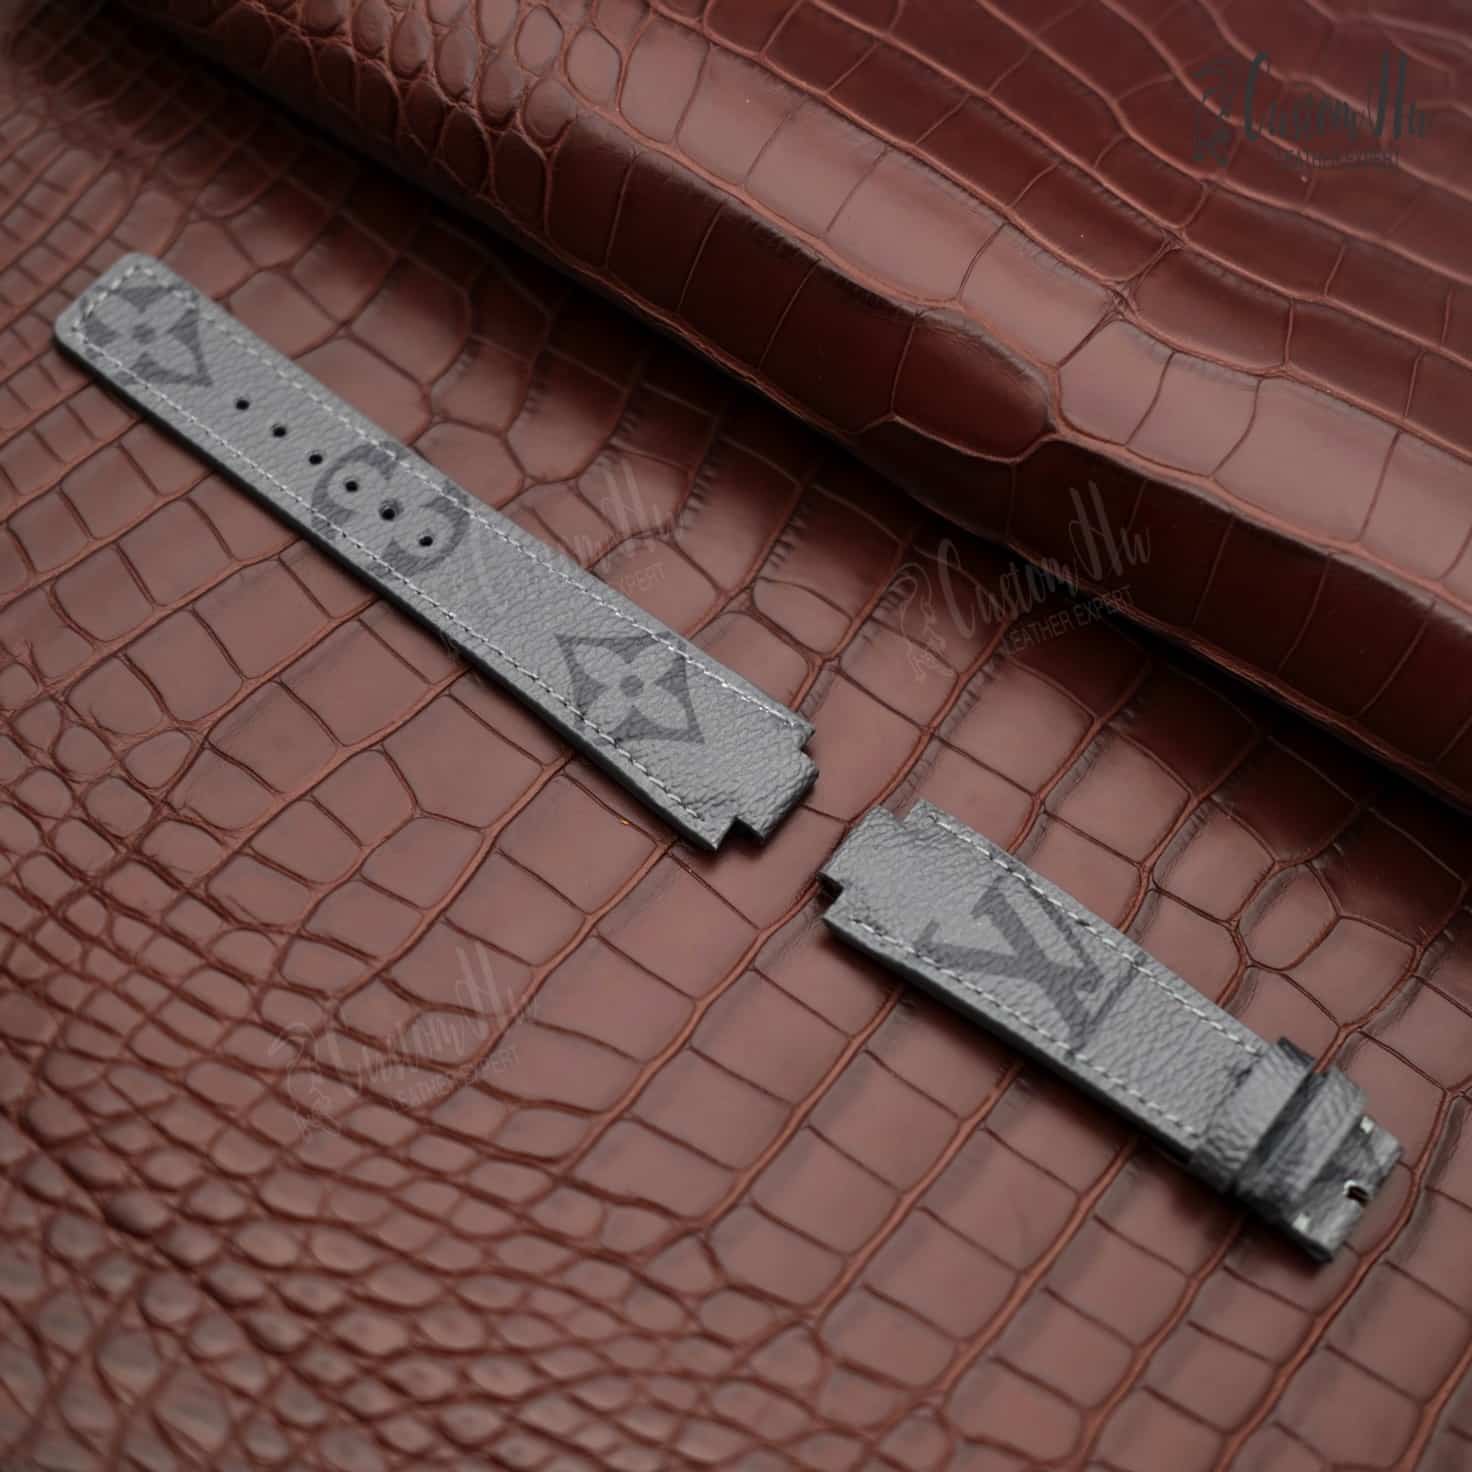 Genuine Leather Watch Band for LV Louis Vuitton Tambour Series Q1121 Q114k  Soft Comfortable Raised Mouth Watch Strap18 21mm